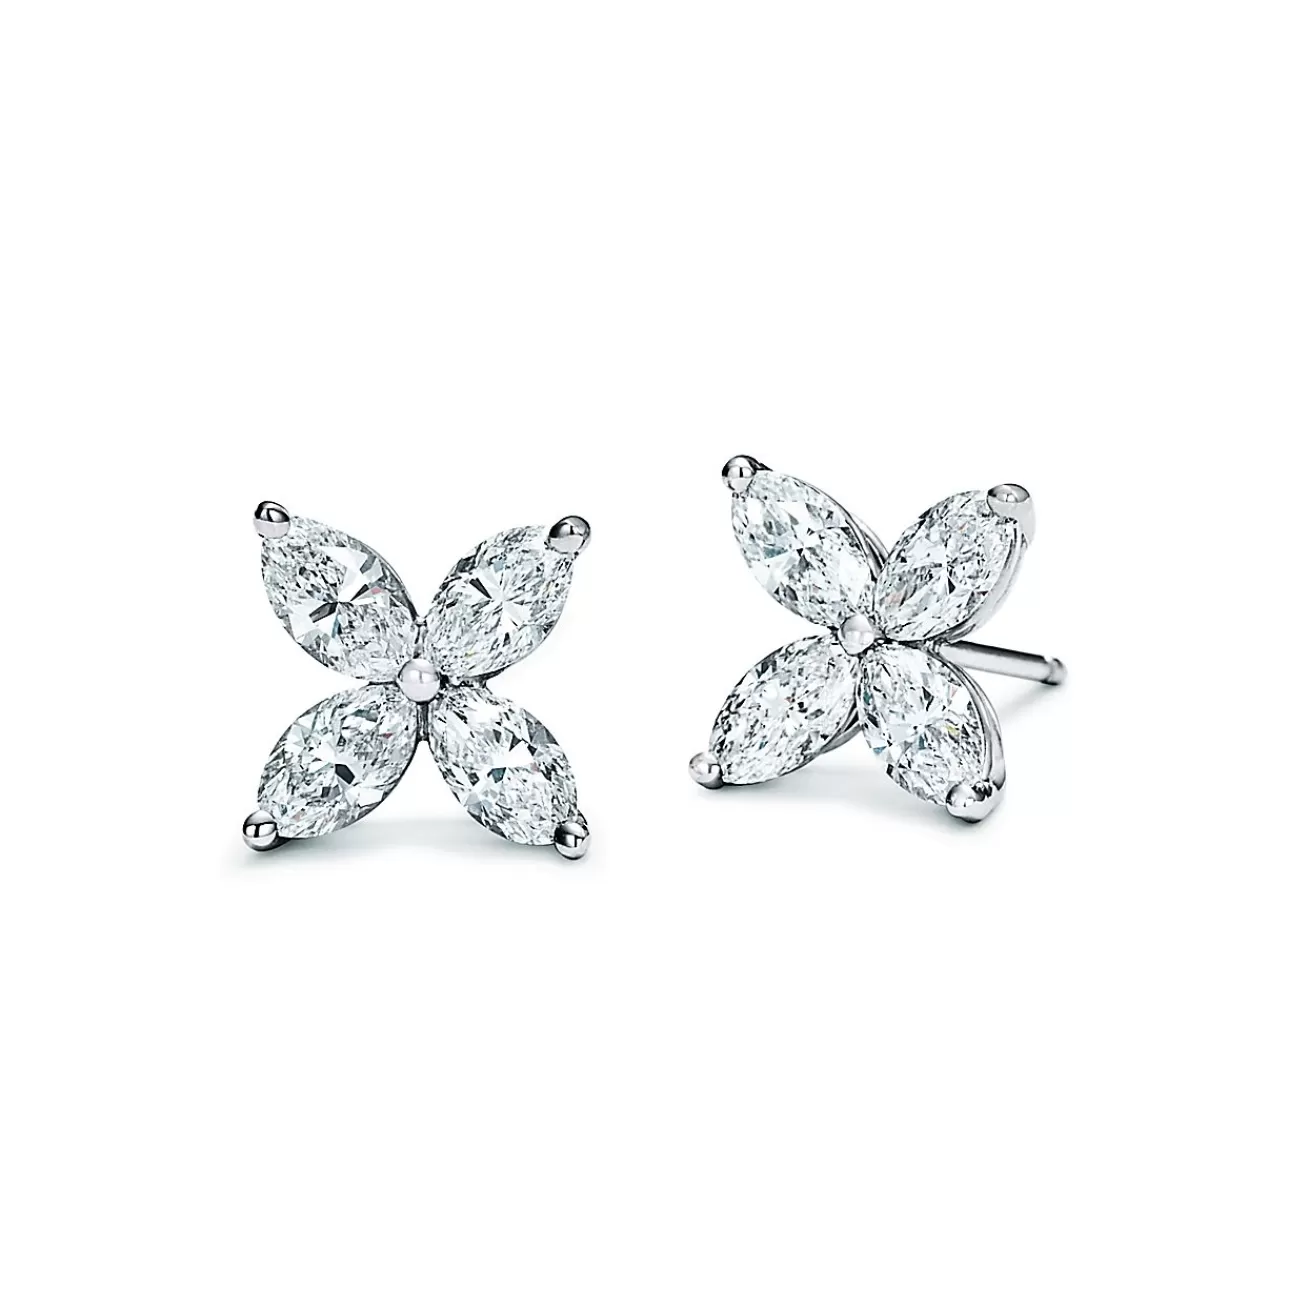 Tiffany & Co. Tiffany Victoria® earrings in platinum with diamonds, large. | ^ Earrings